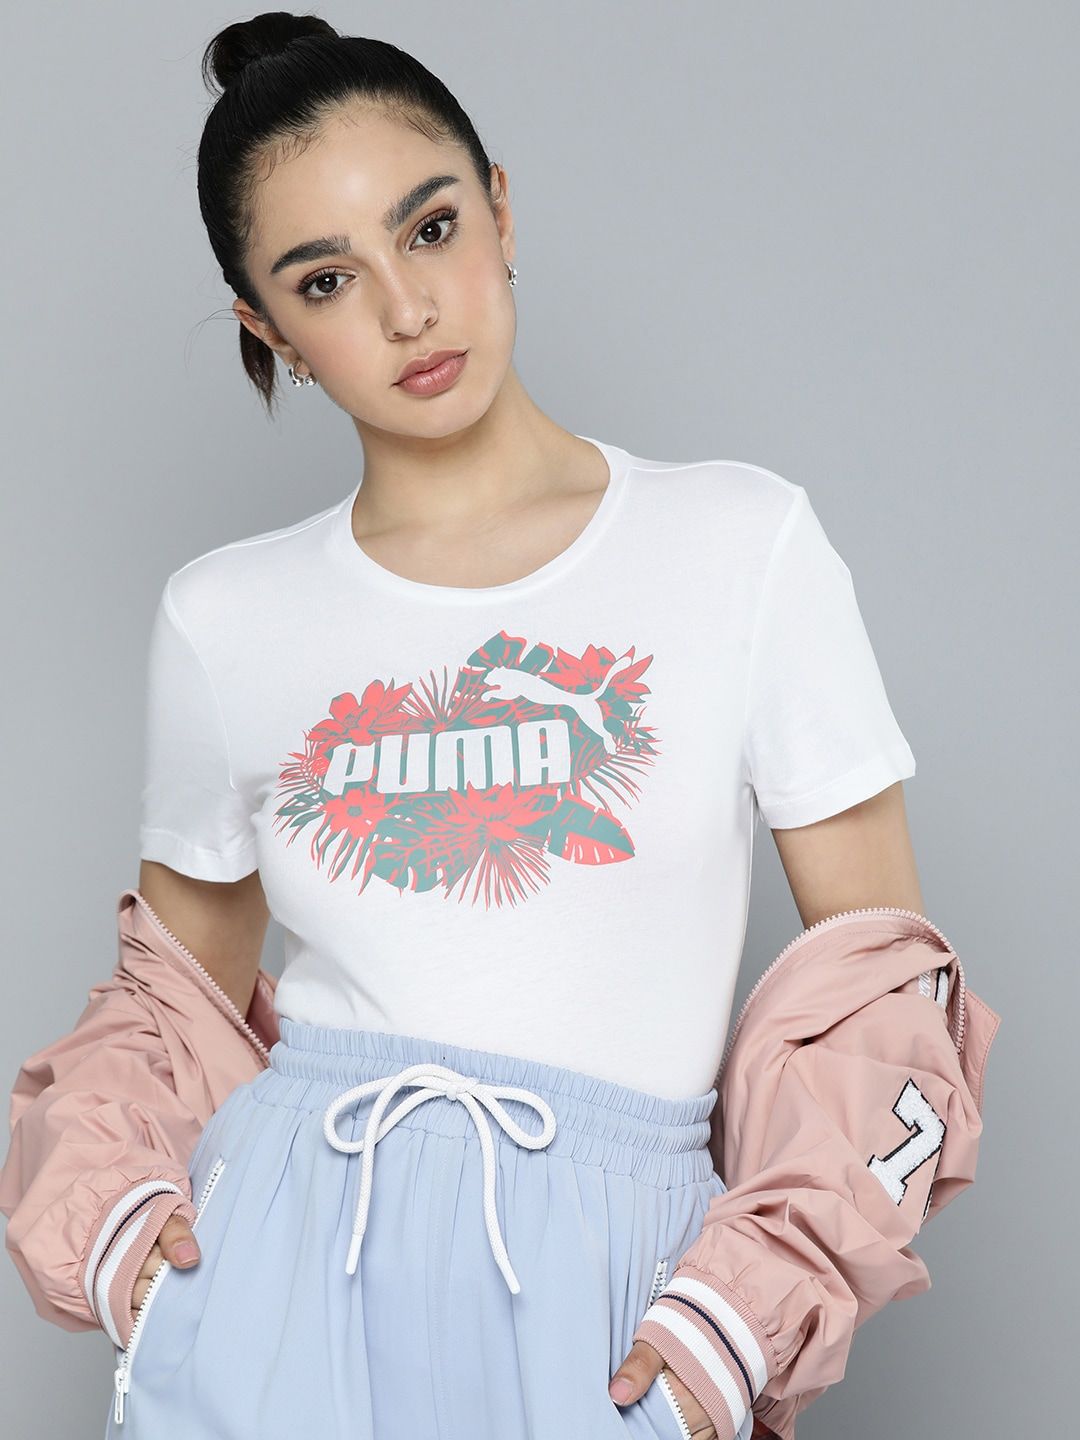 Puma Floral Printed Pure Cotton ESS+ Flowers Power Regular Fit T-shirt Price in India